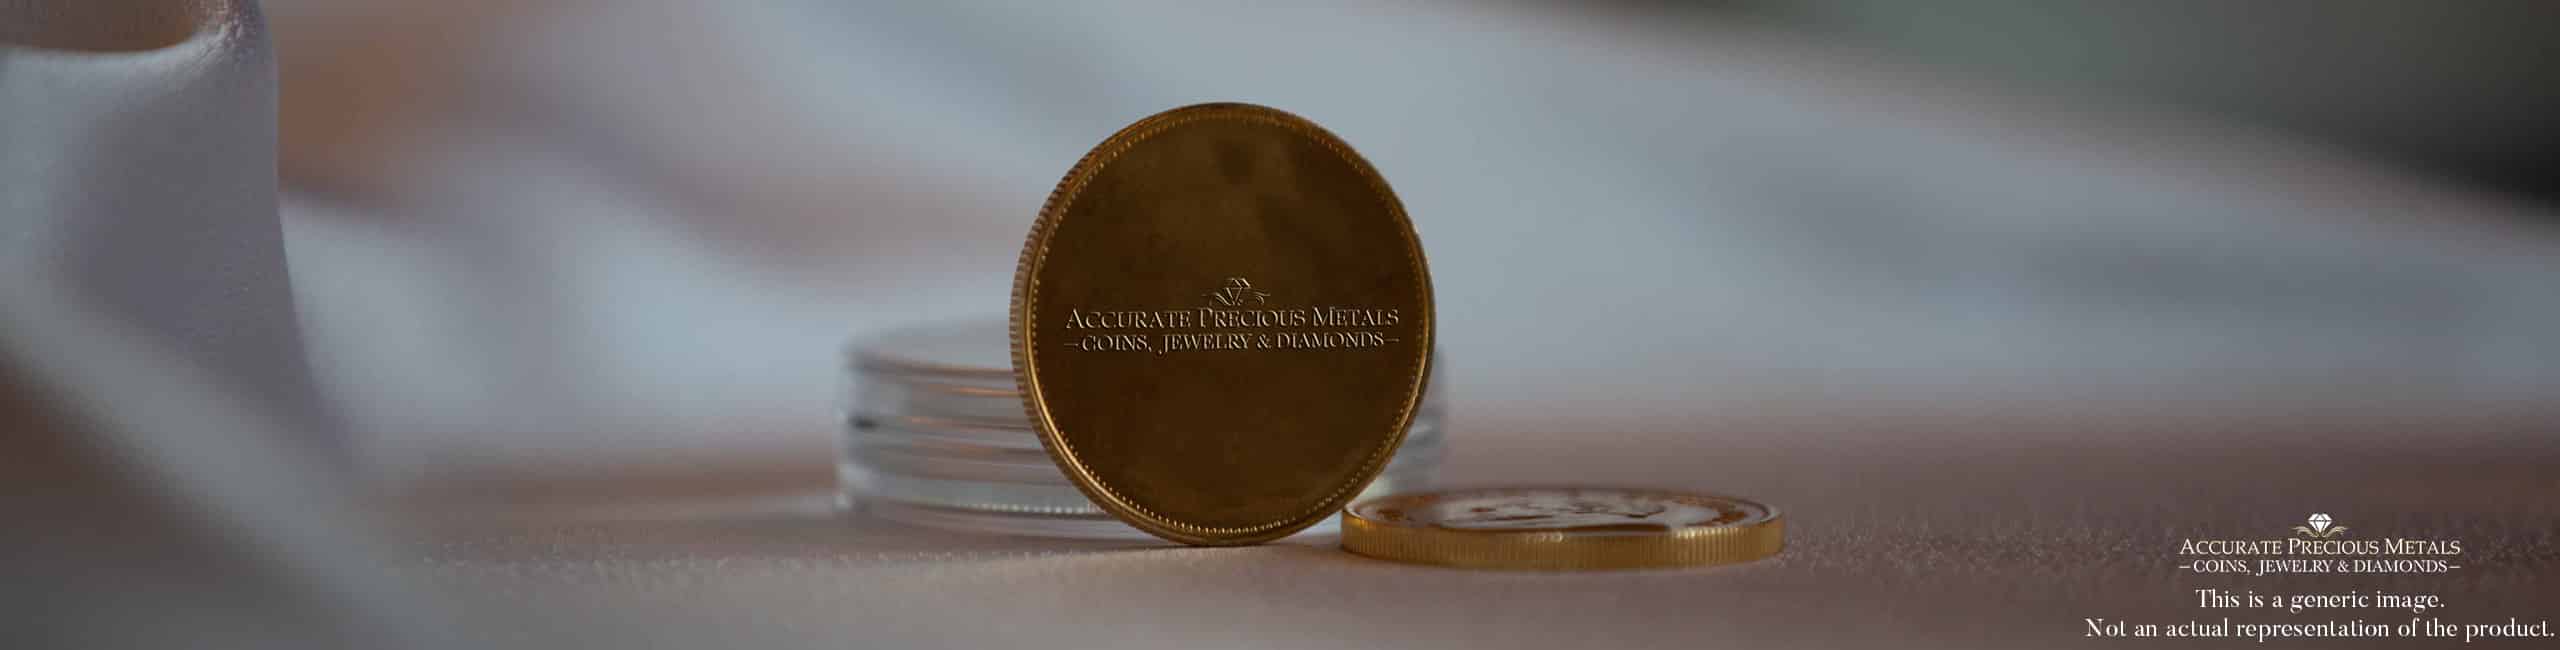 Shining Austrian Gold Ducat 1/10 oz Coin - Trusted Investment Choice